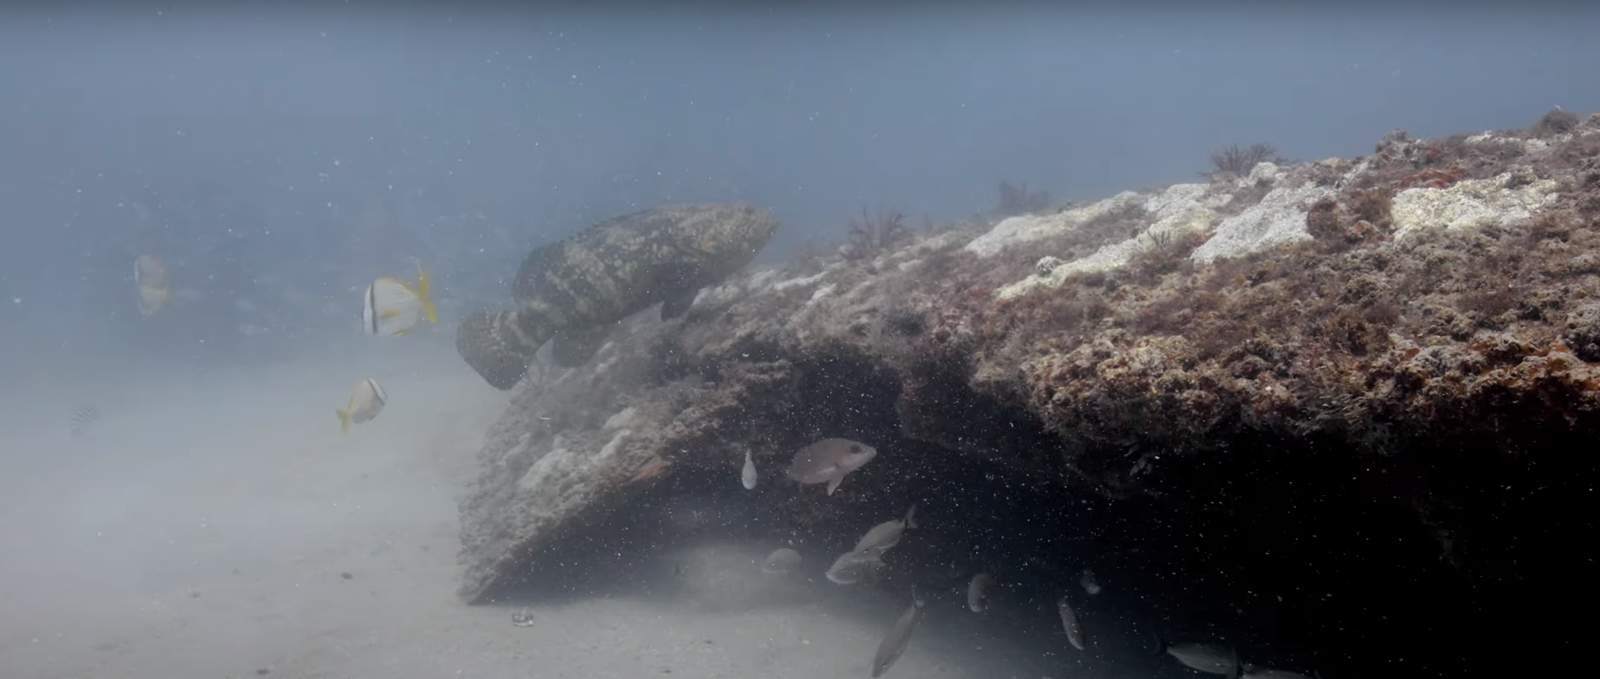 Whats left of St. Augustine shipwreck after 95 years?